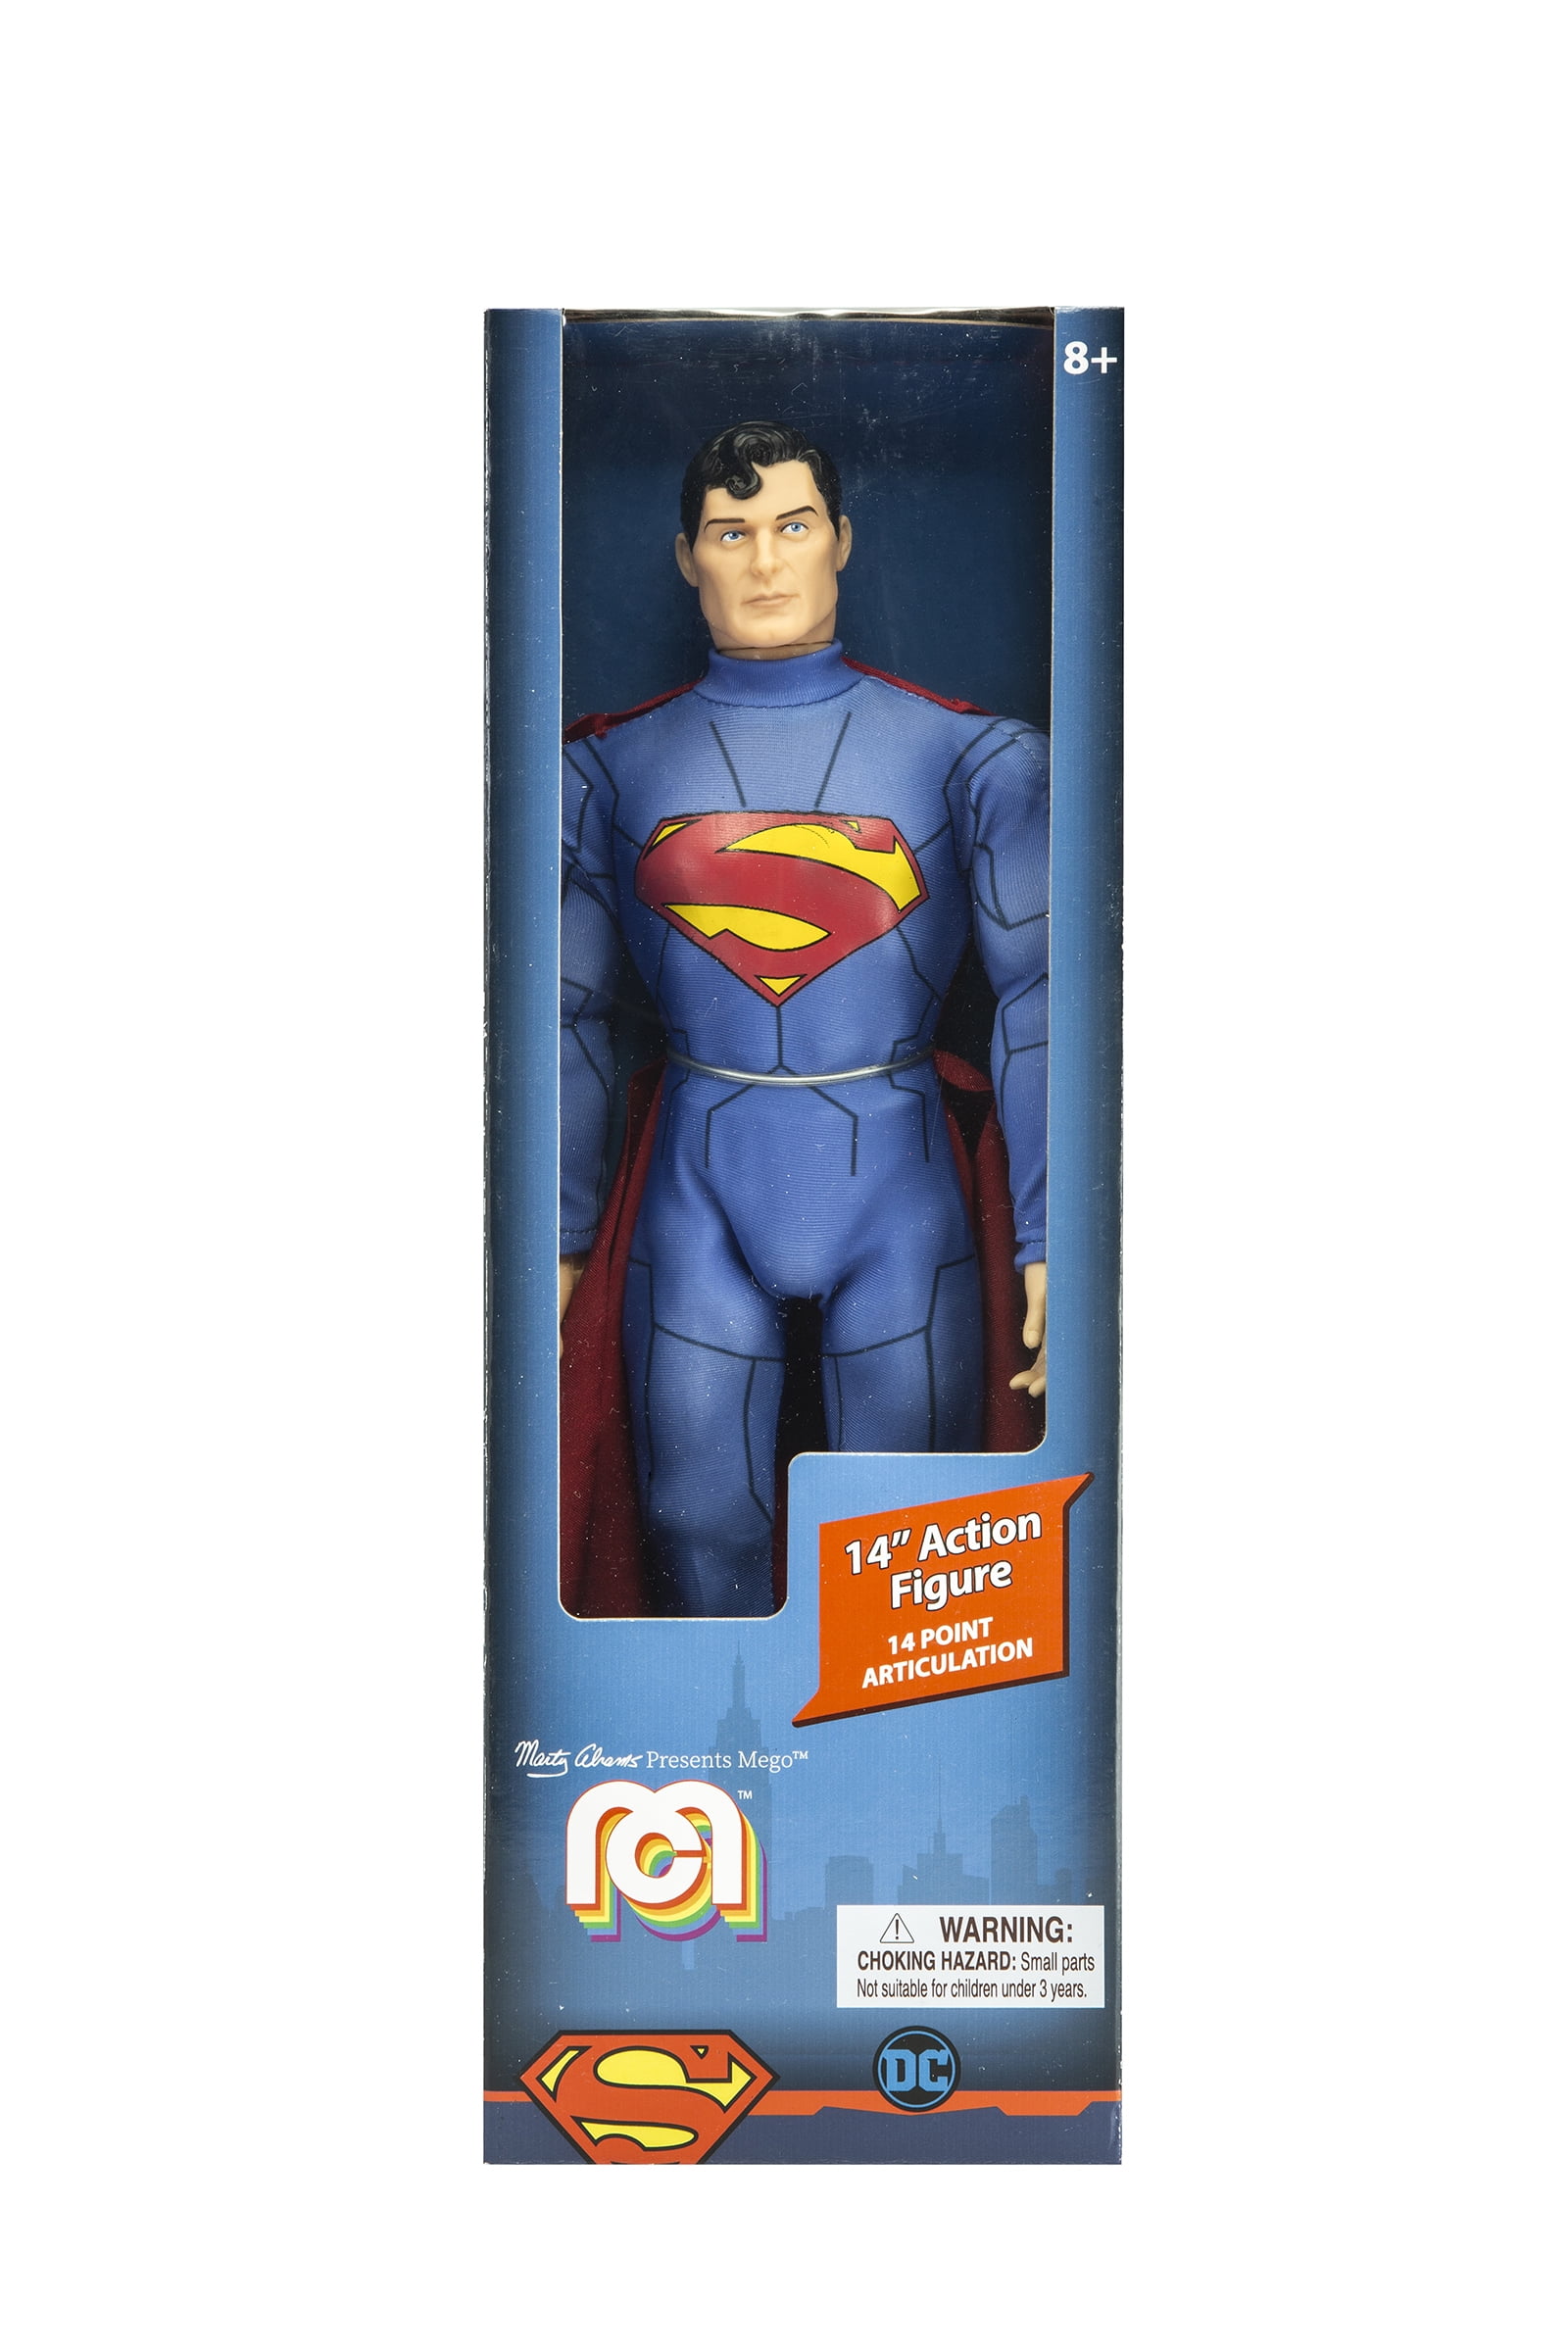 Superman Mego Classic 14" Limited Edition Action Figure 1471 0f 8000 for sale online 